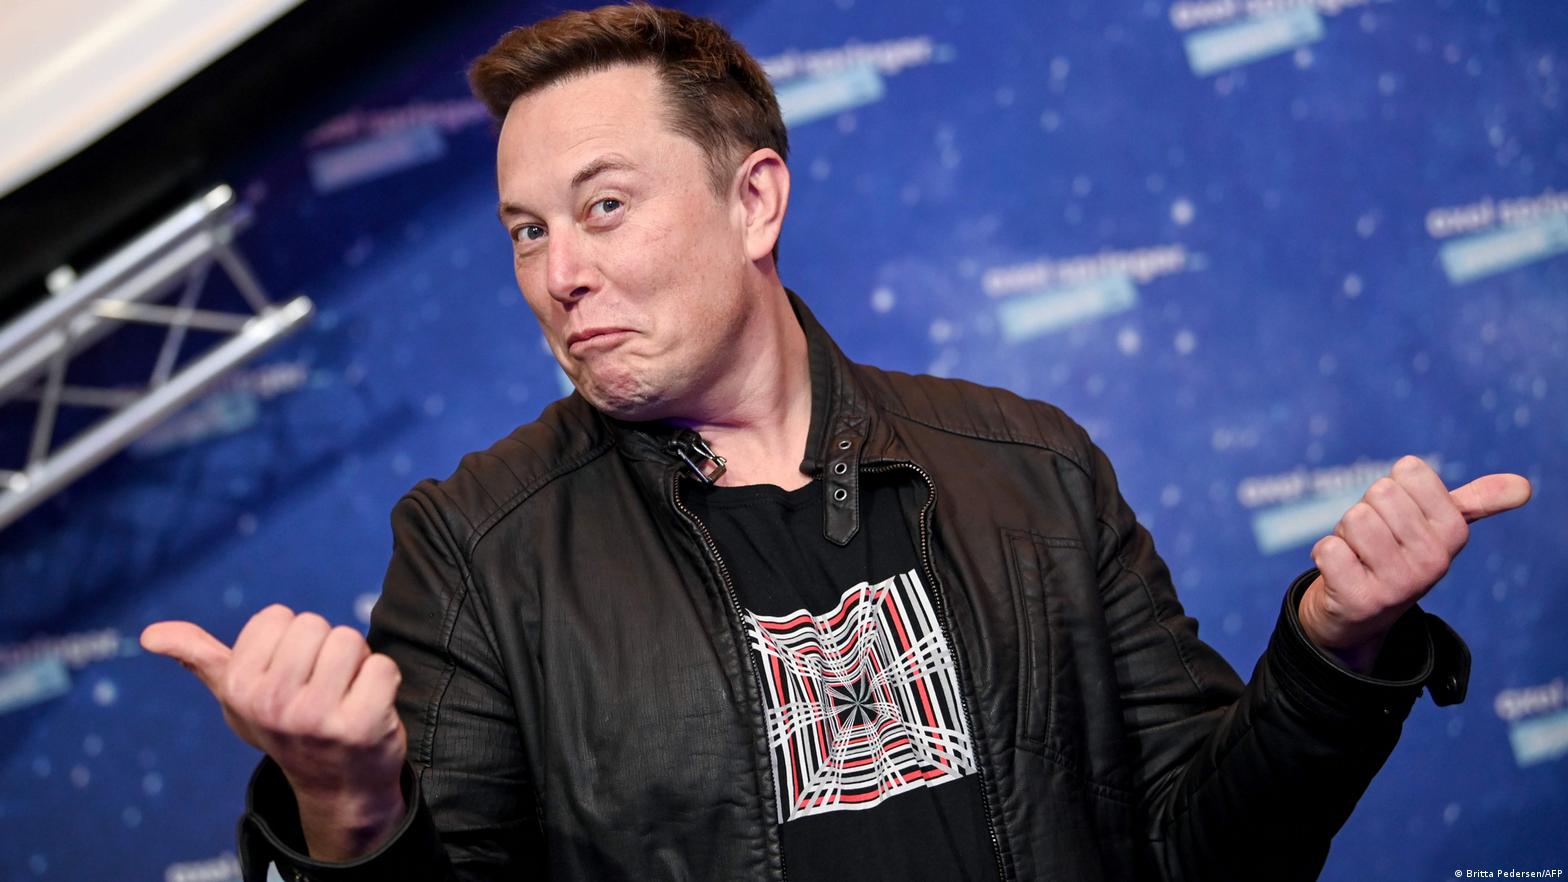 Elon Musk Steps In: Saving Free Speech for a Doctor at Odds with COVID Views